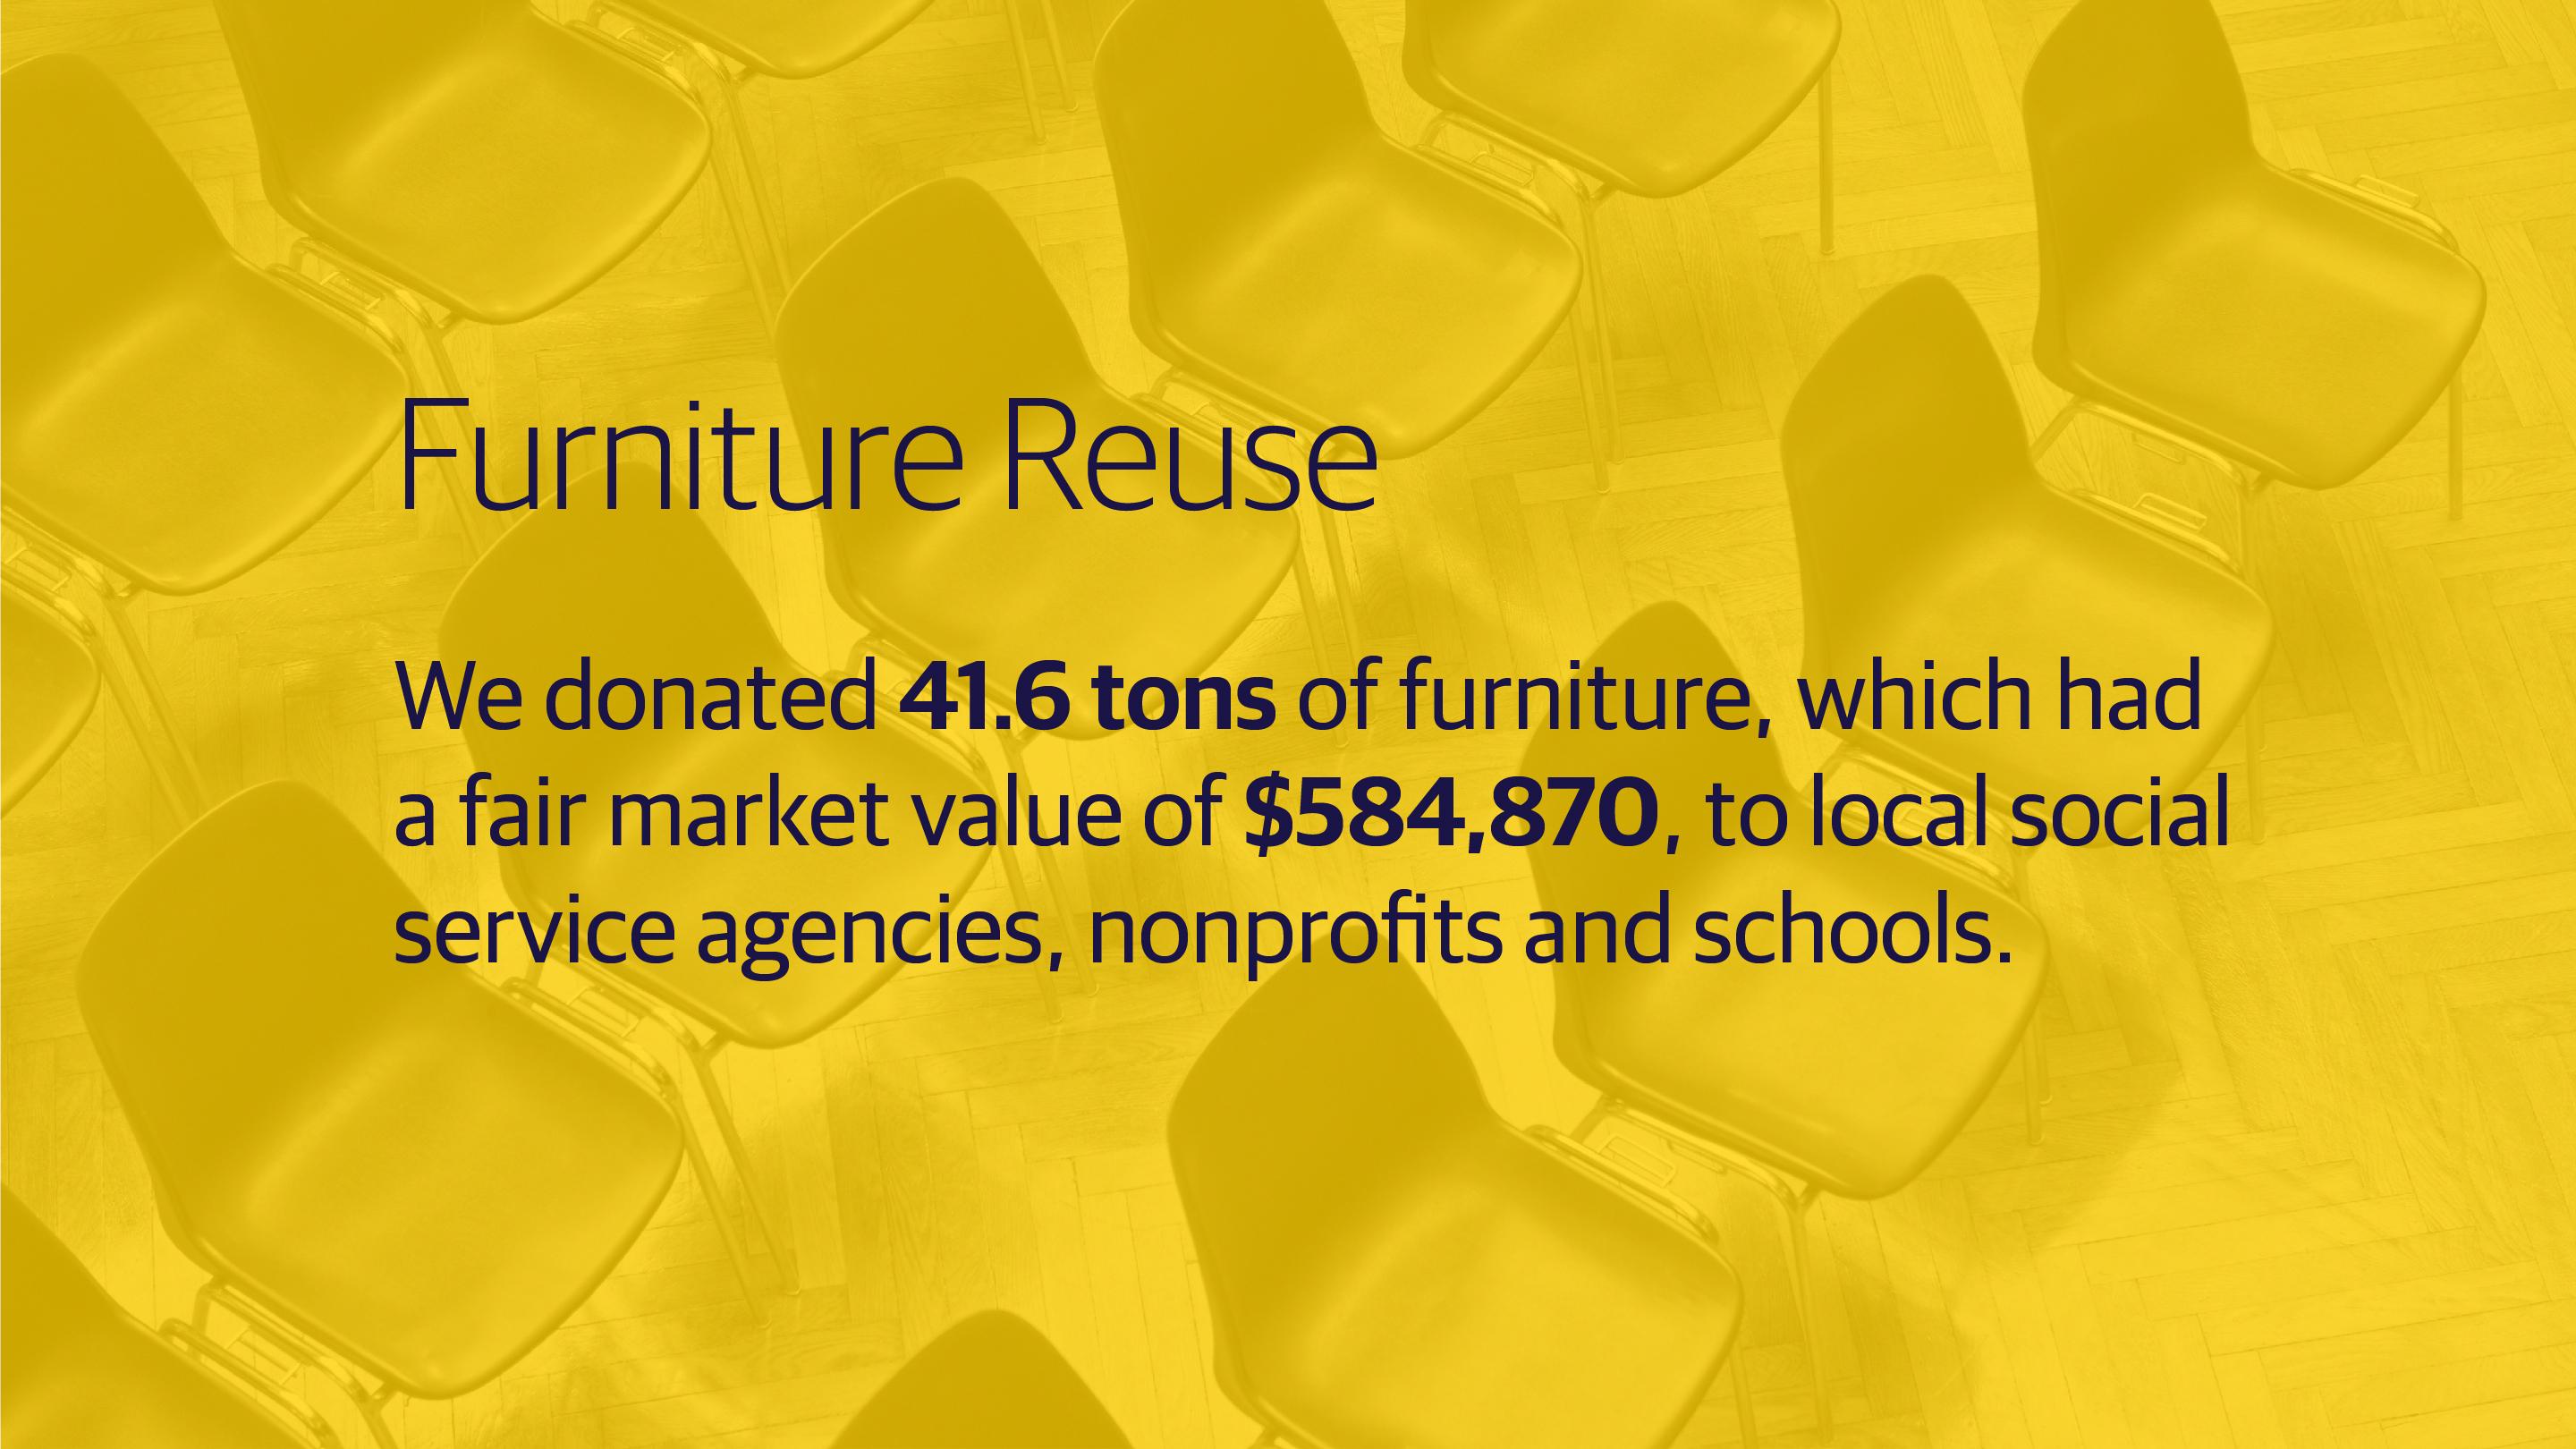 (slide 2 of 3) We diverted 41.6 tons of furniture, which had a fair market value of $584,870 to local social service agencies, nonprofits and schools.  . 